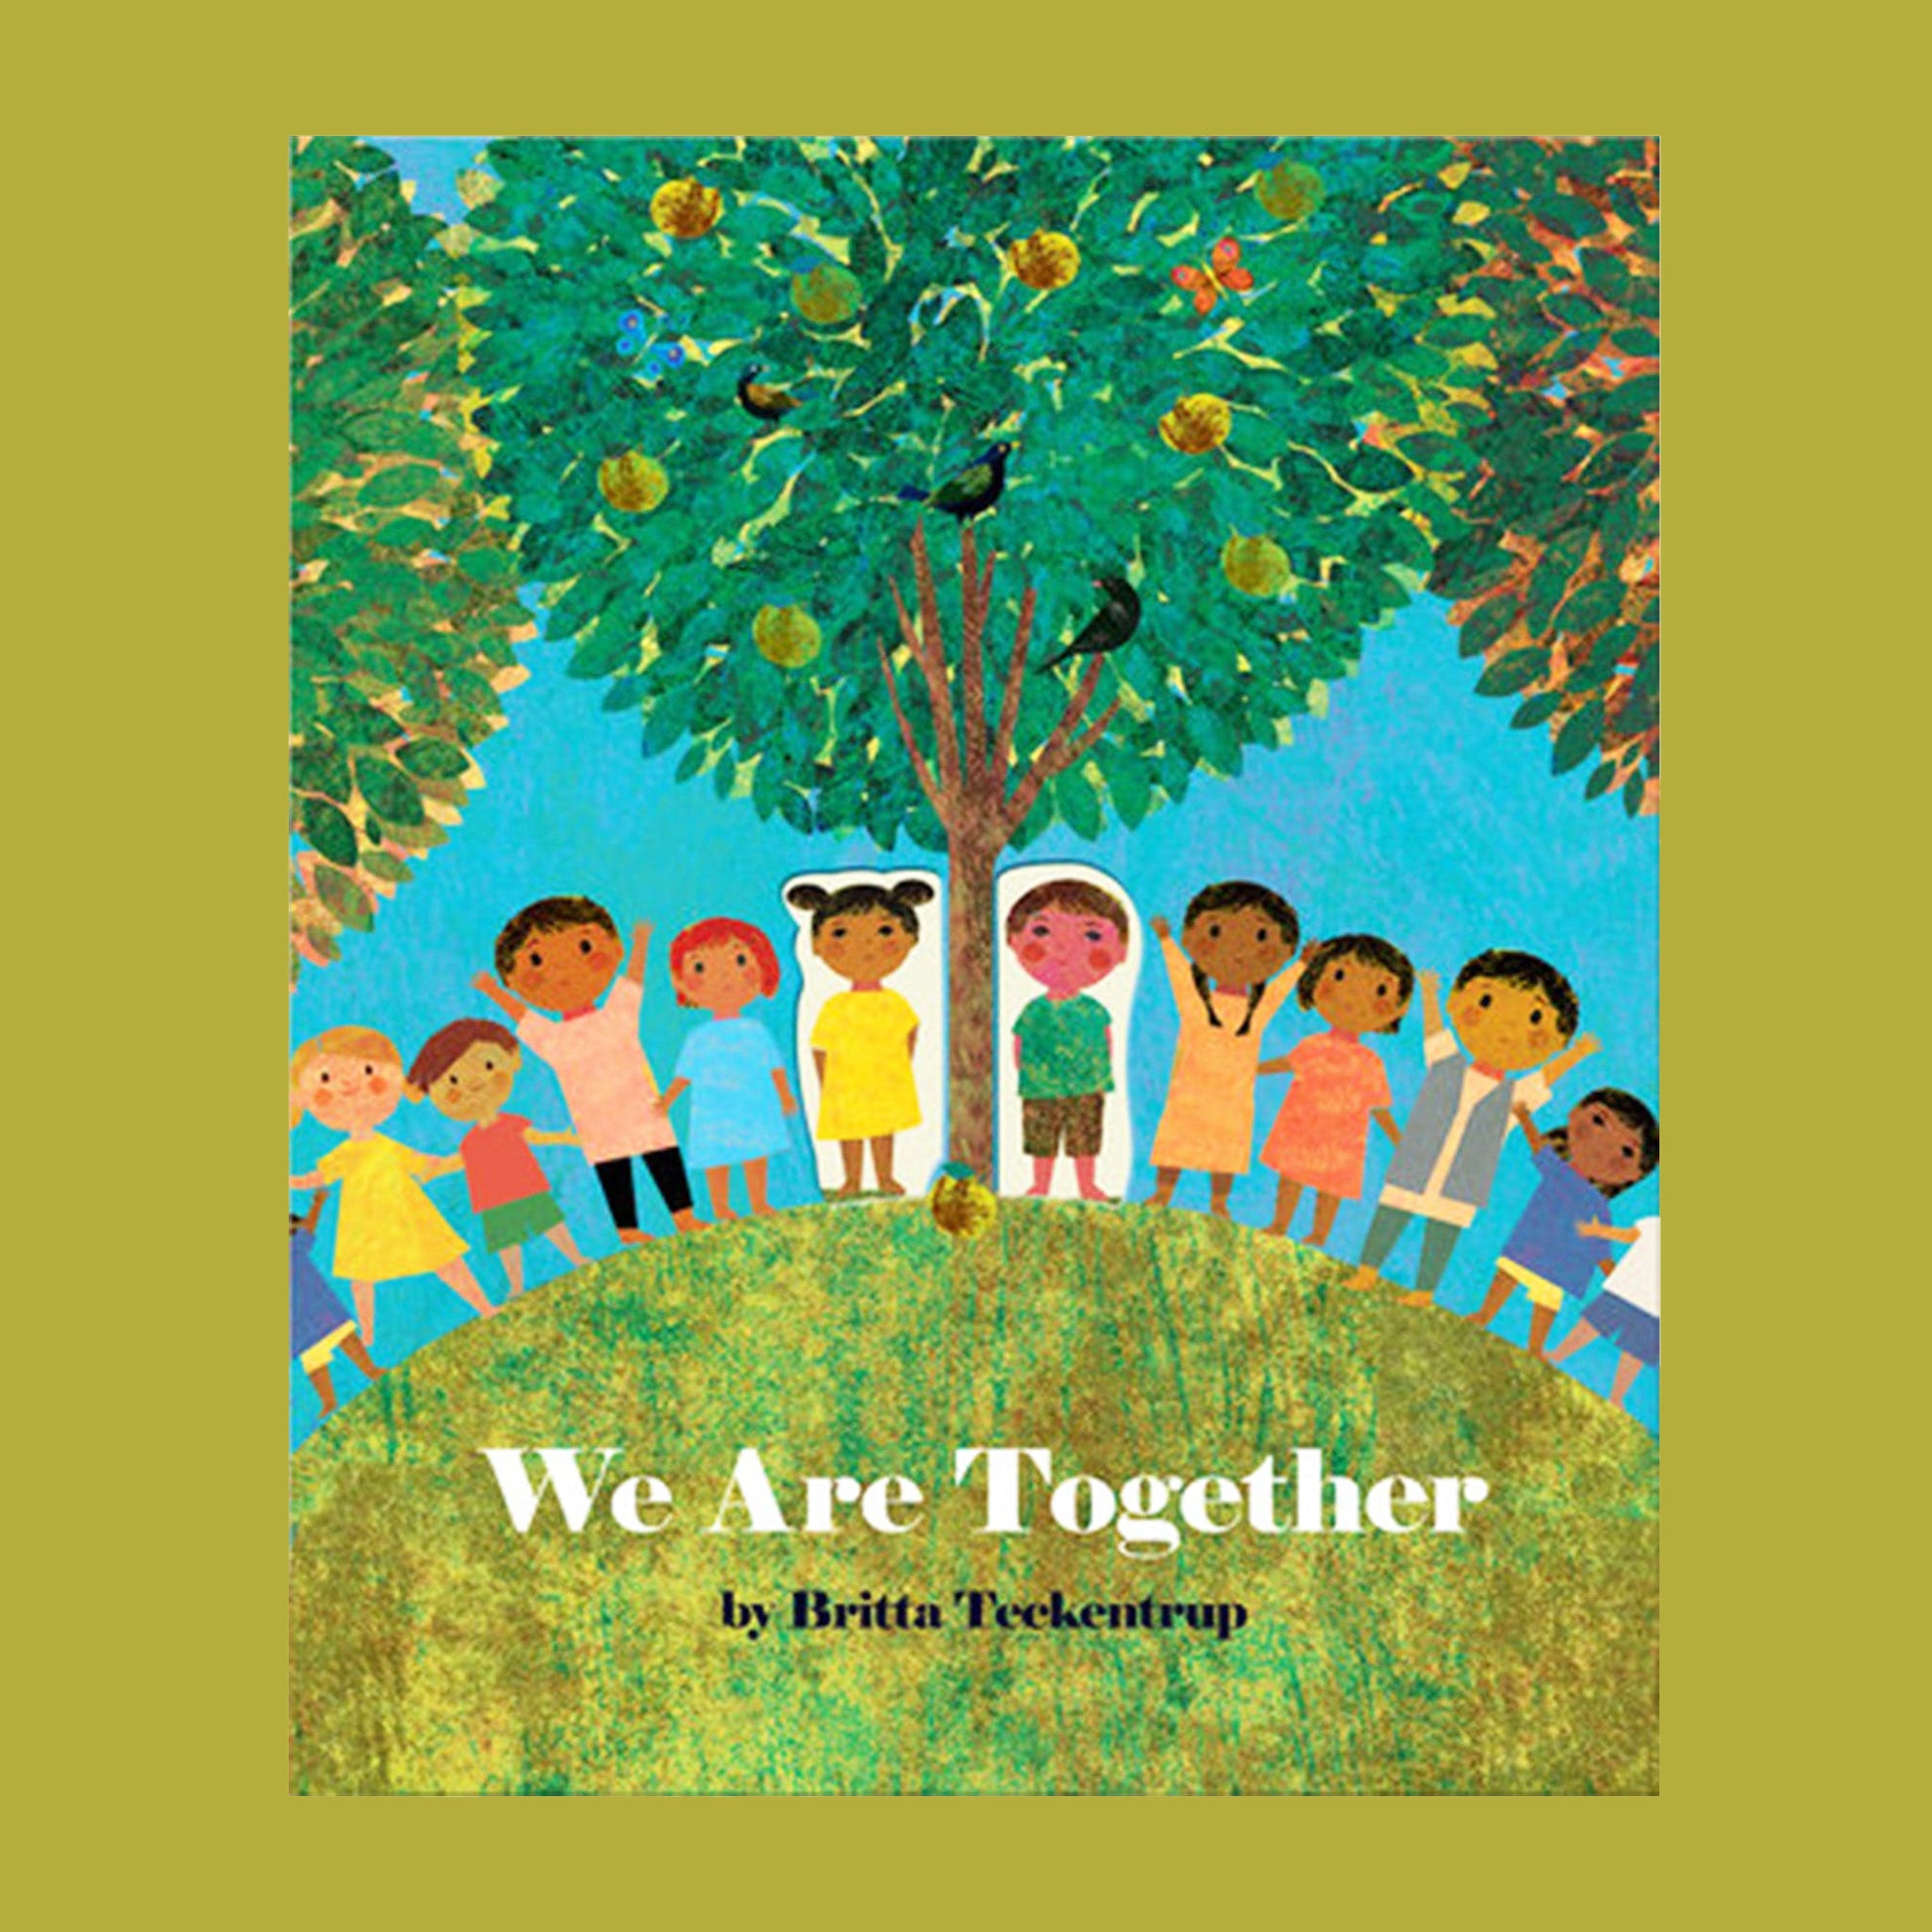 This children's picture book cover features a row of lively children standing side by side below three towering trees. The tree in the middle is in focus and the other two peak into the frame. The title reads 'We Are Together' in white text over the textured green, round hill the children stand on.